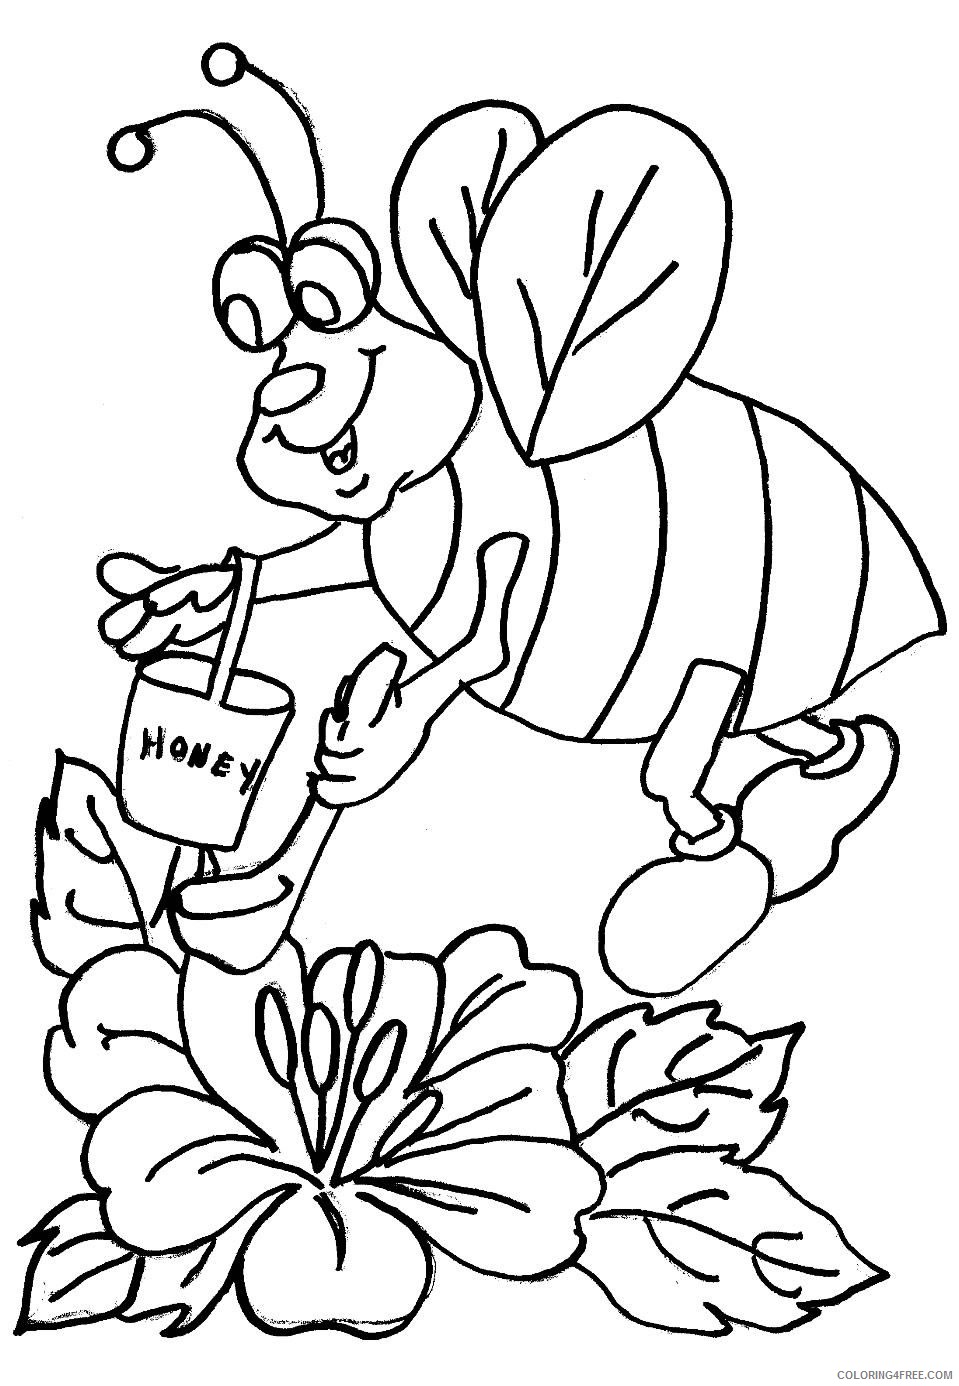 honey bee coloring pages free to print Coloring4free